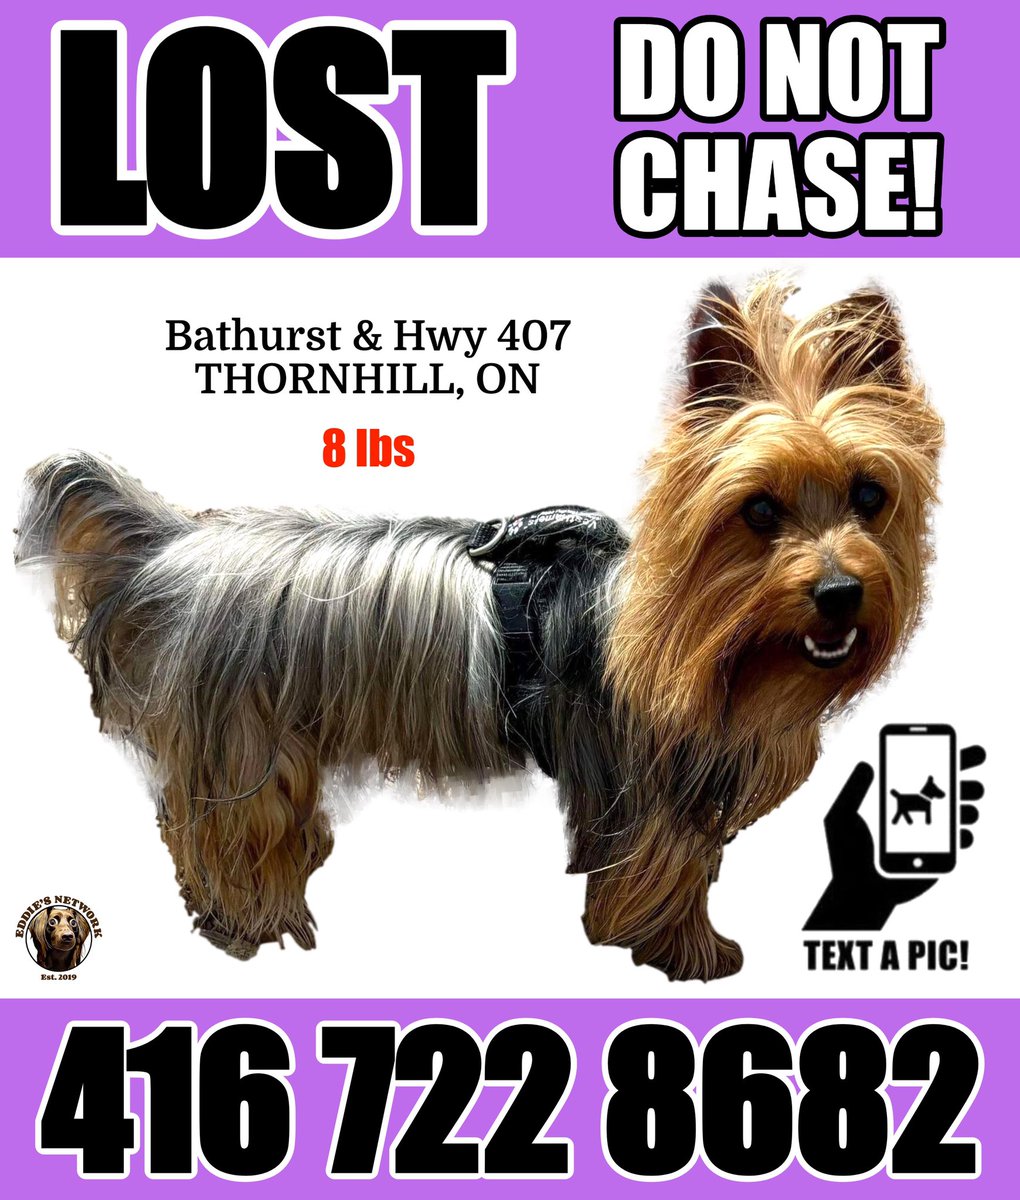 LOST DOG #Bathurst #Hwy407
#ThornHill
If seen, please do not approach, chase or call out! Note the direction of travel, and call/text right away.
Please, do not post sightings online. Missing since May 7, 2024.

#thornhillontario #ontario #yorkregion #vaughan #vaughanontario